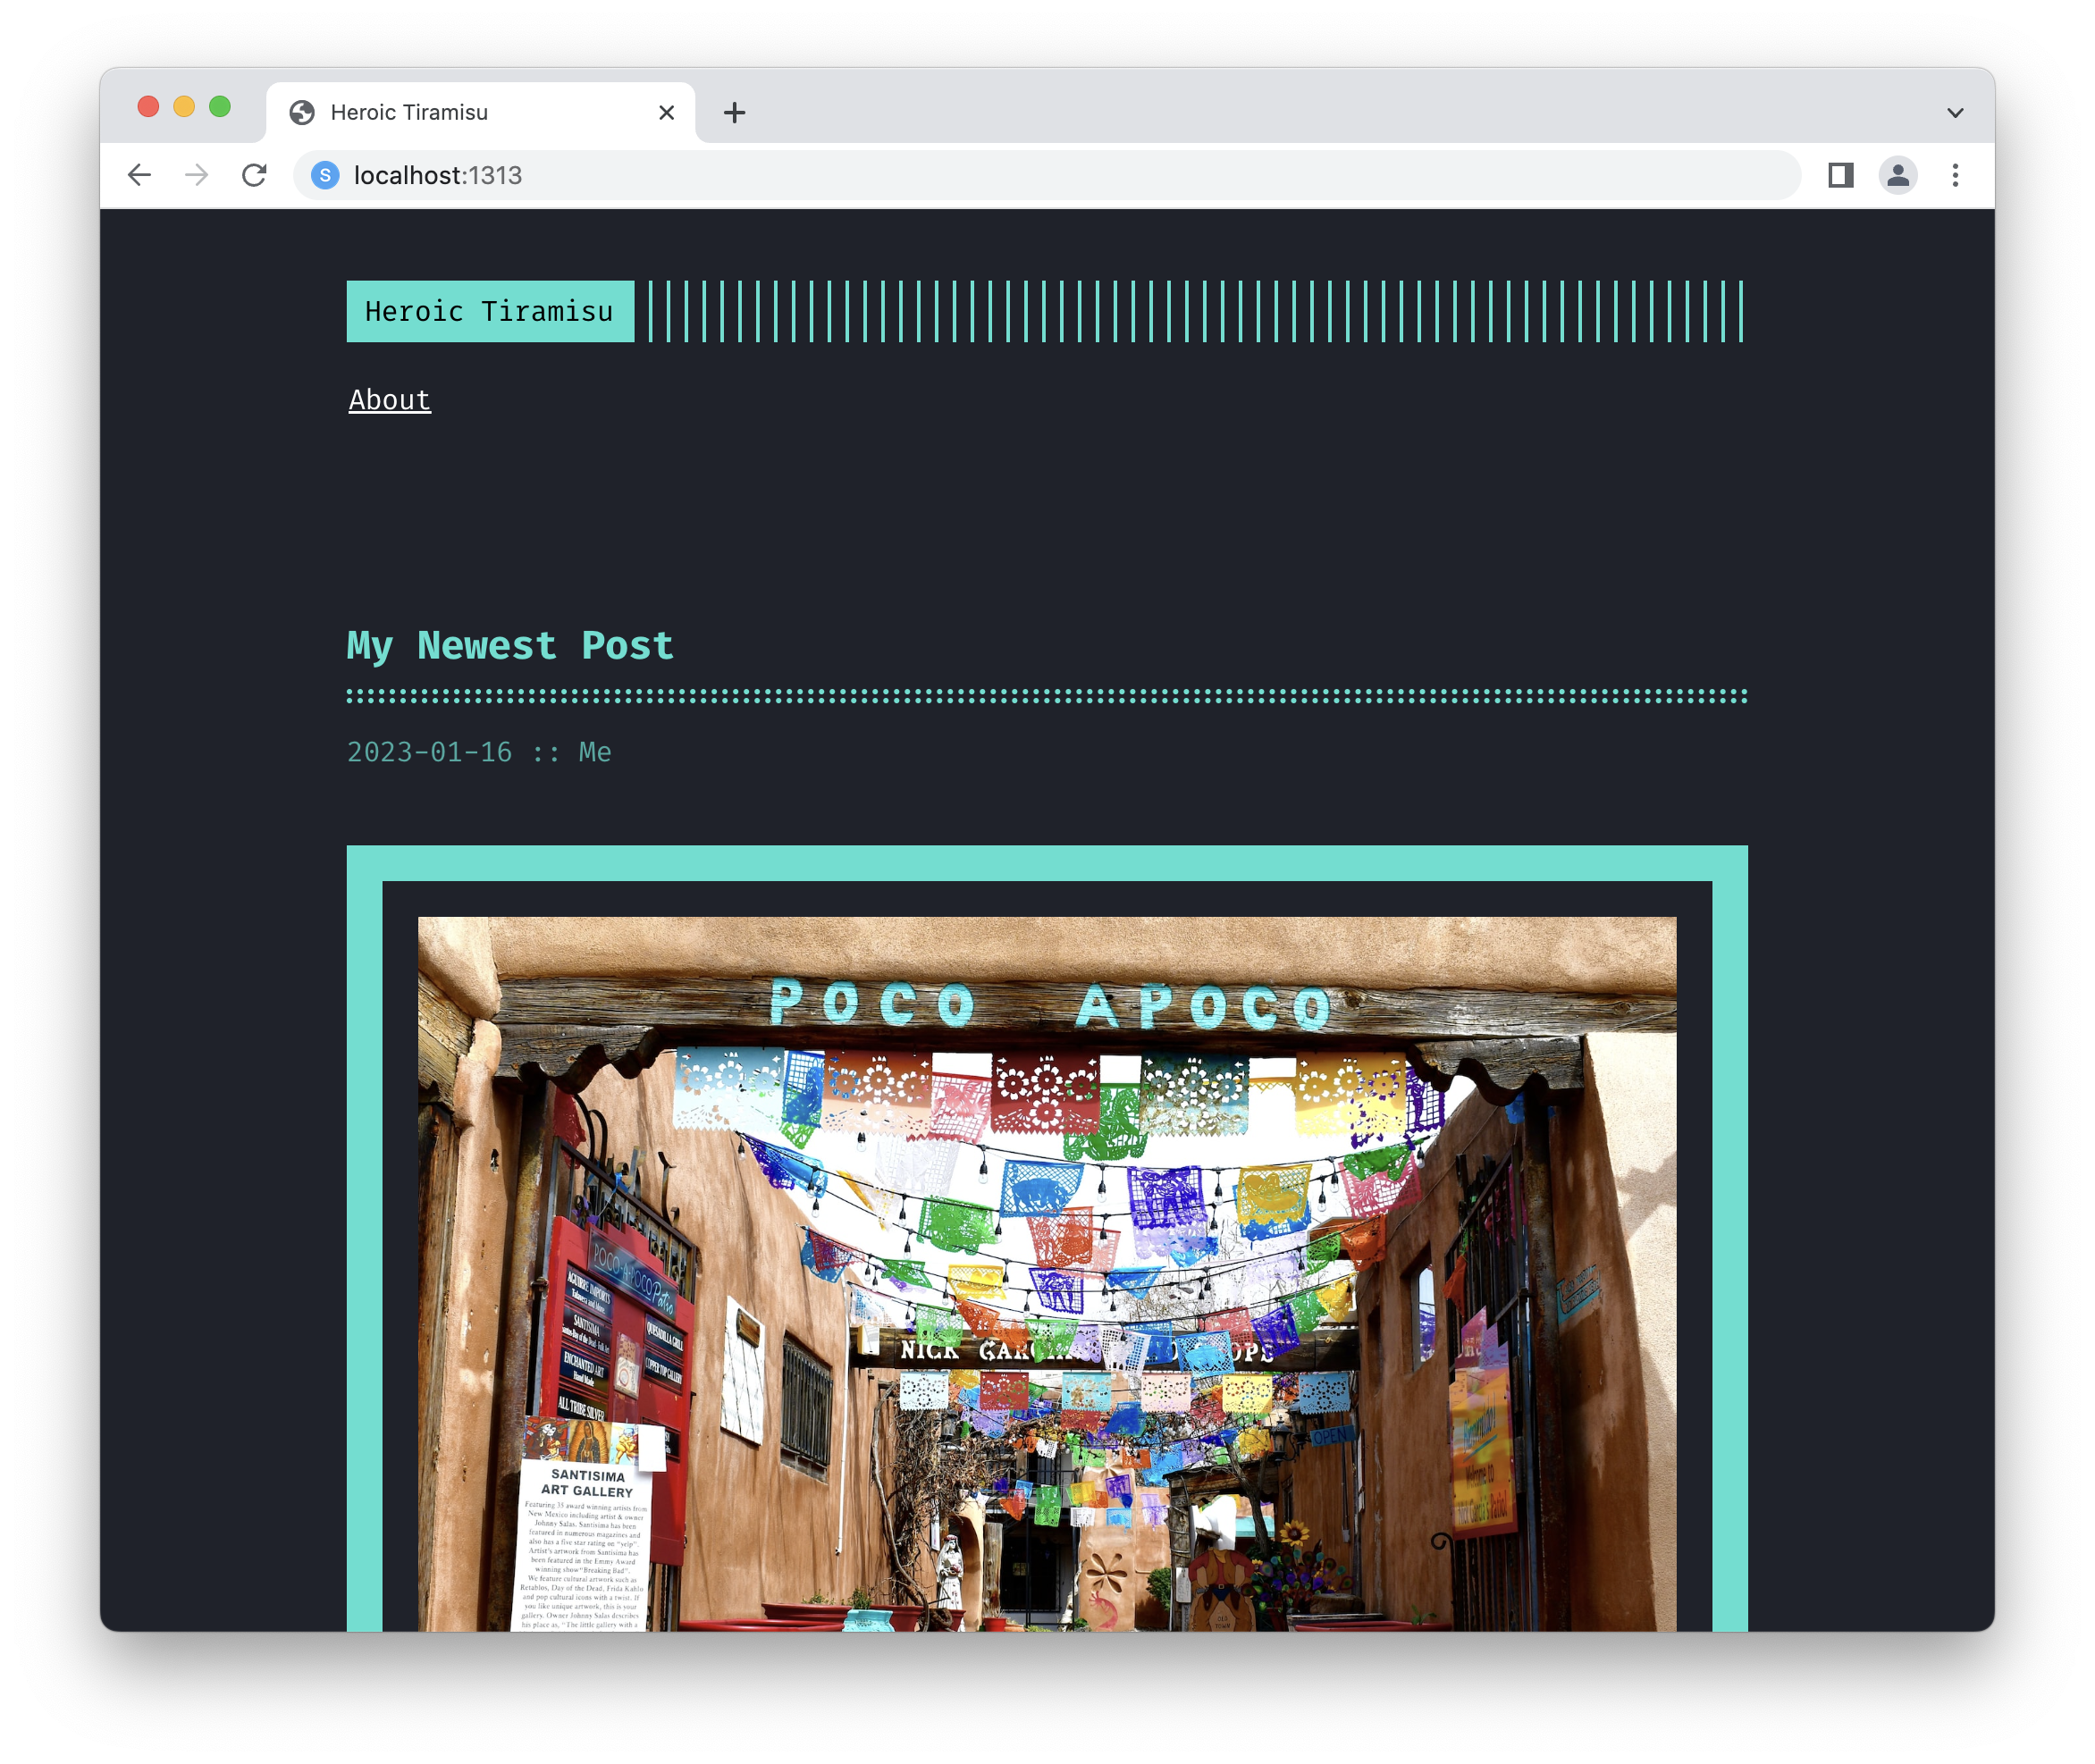 The website rendered with turquoise color